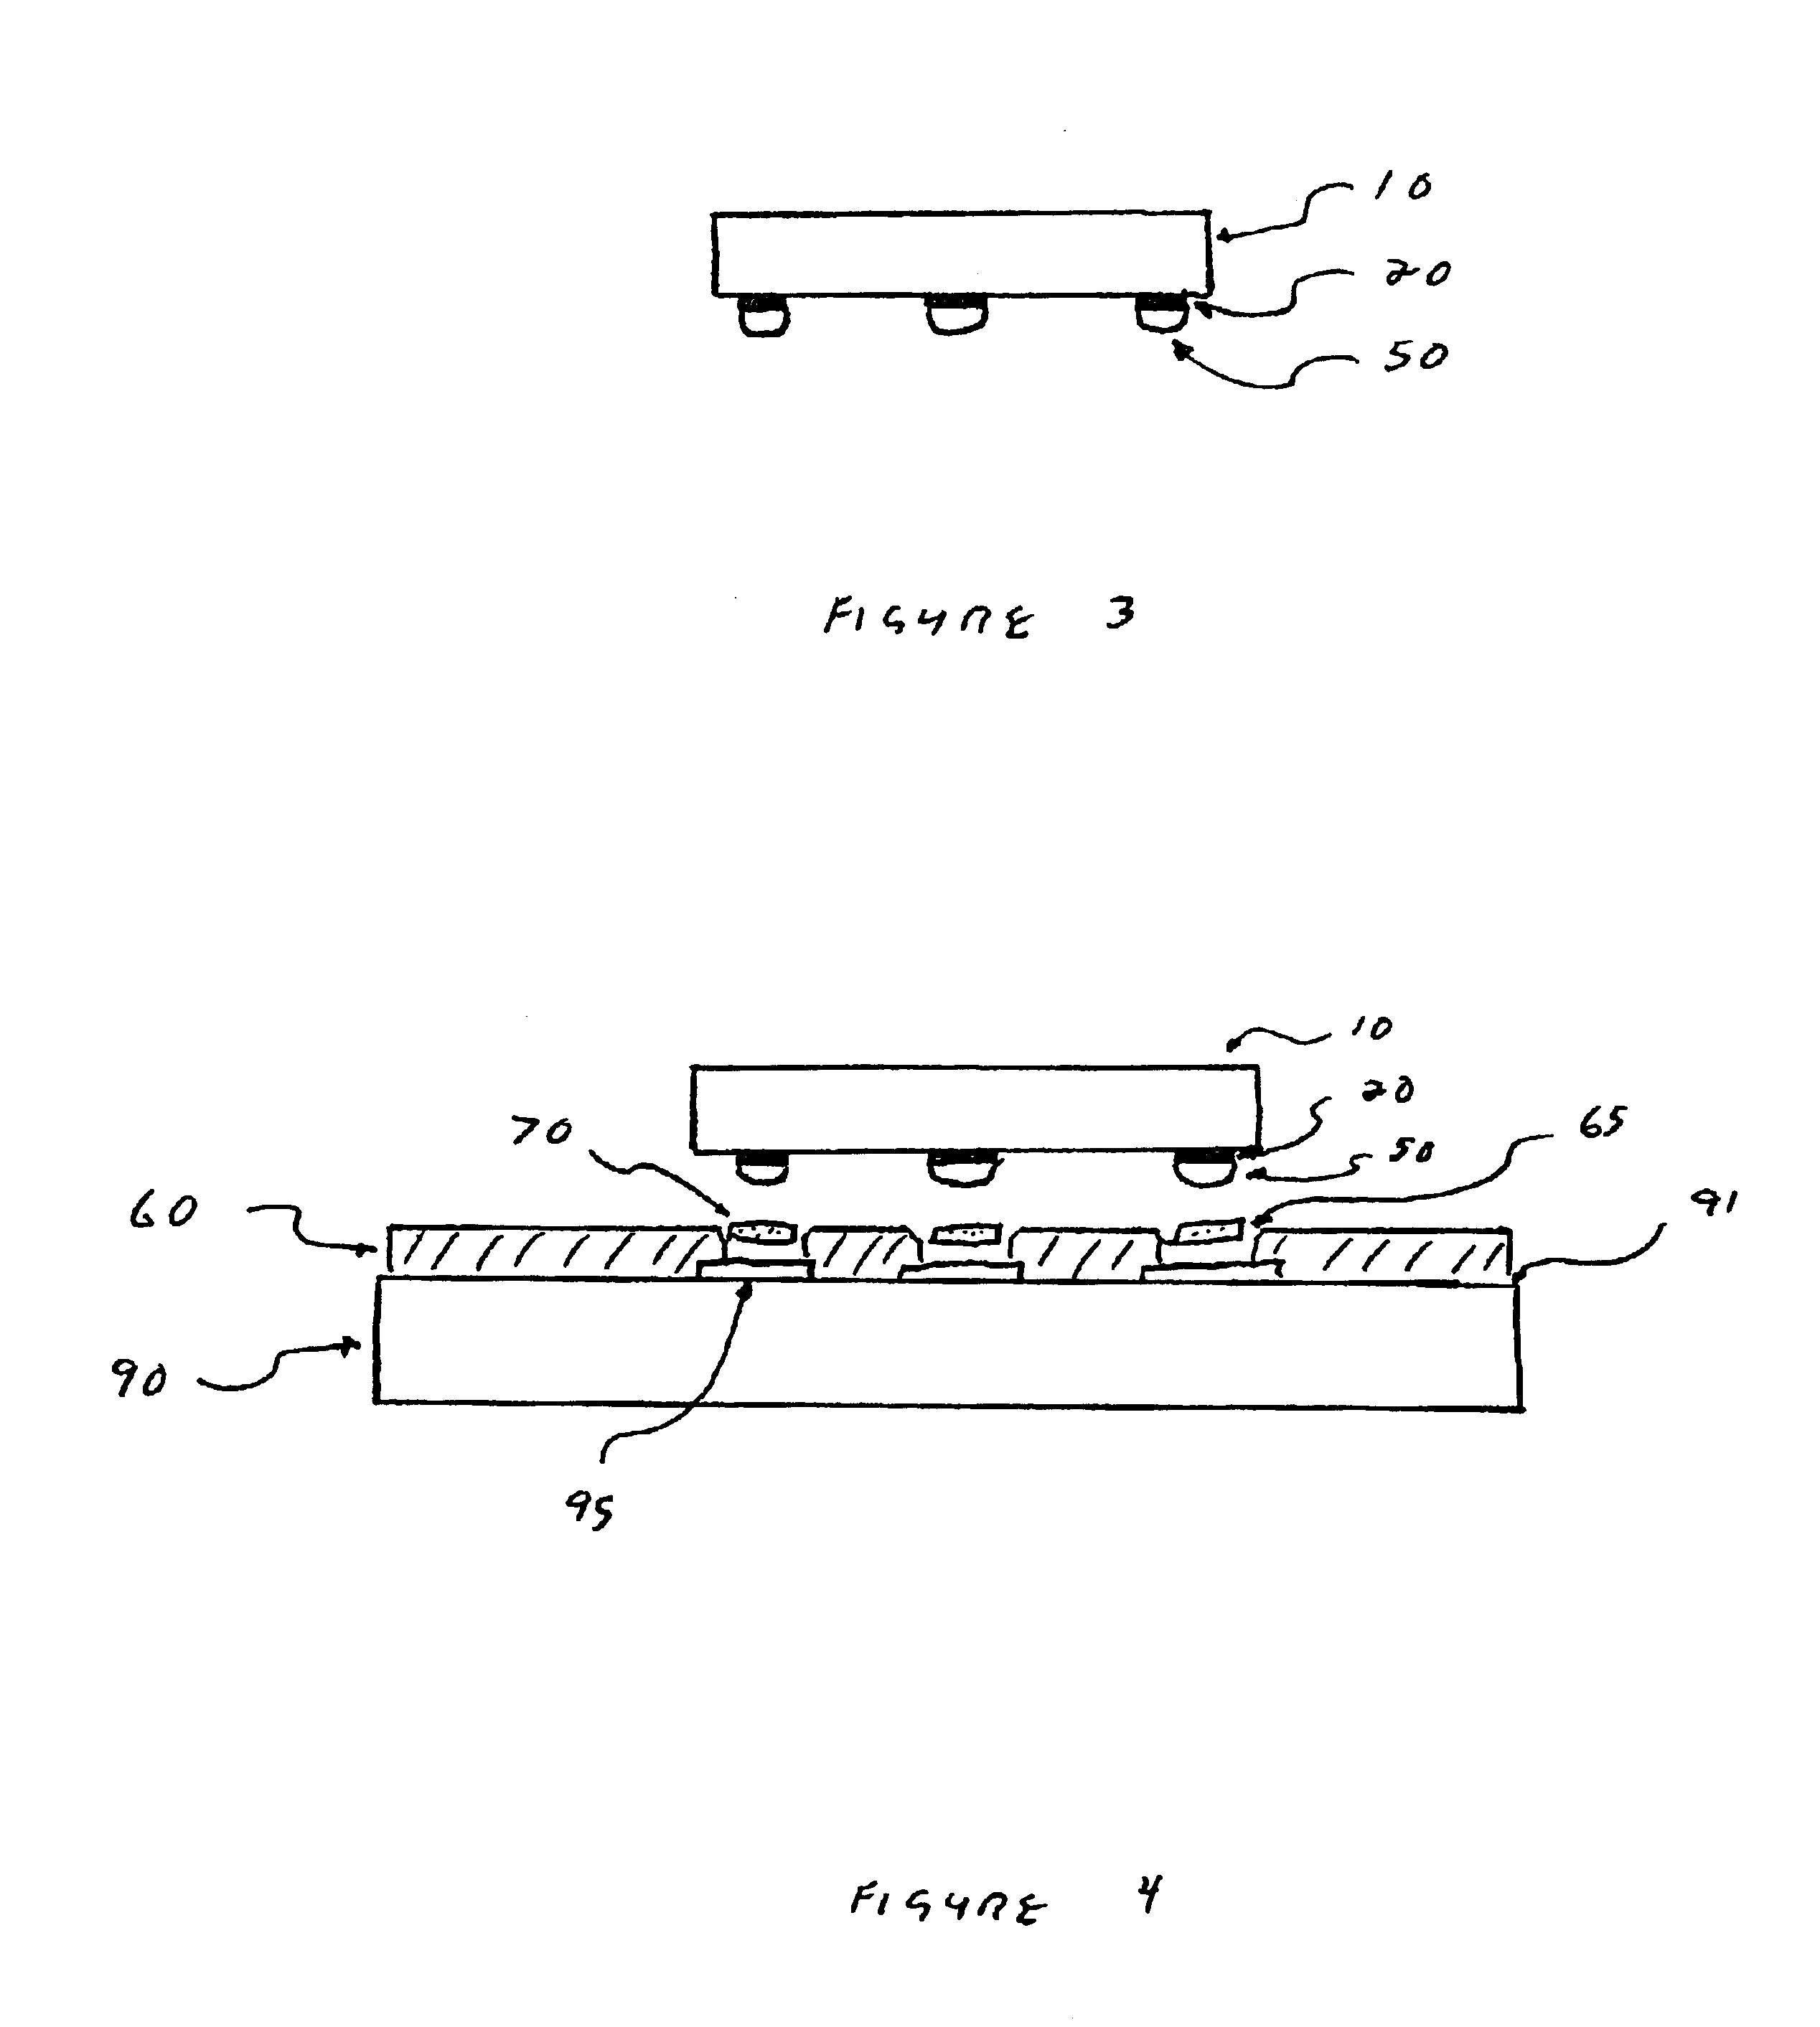 Structure and method for lead free solder electronic package interconnections